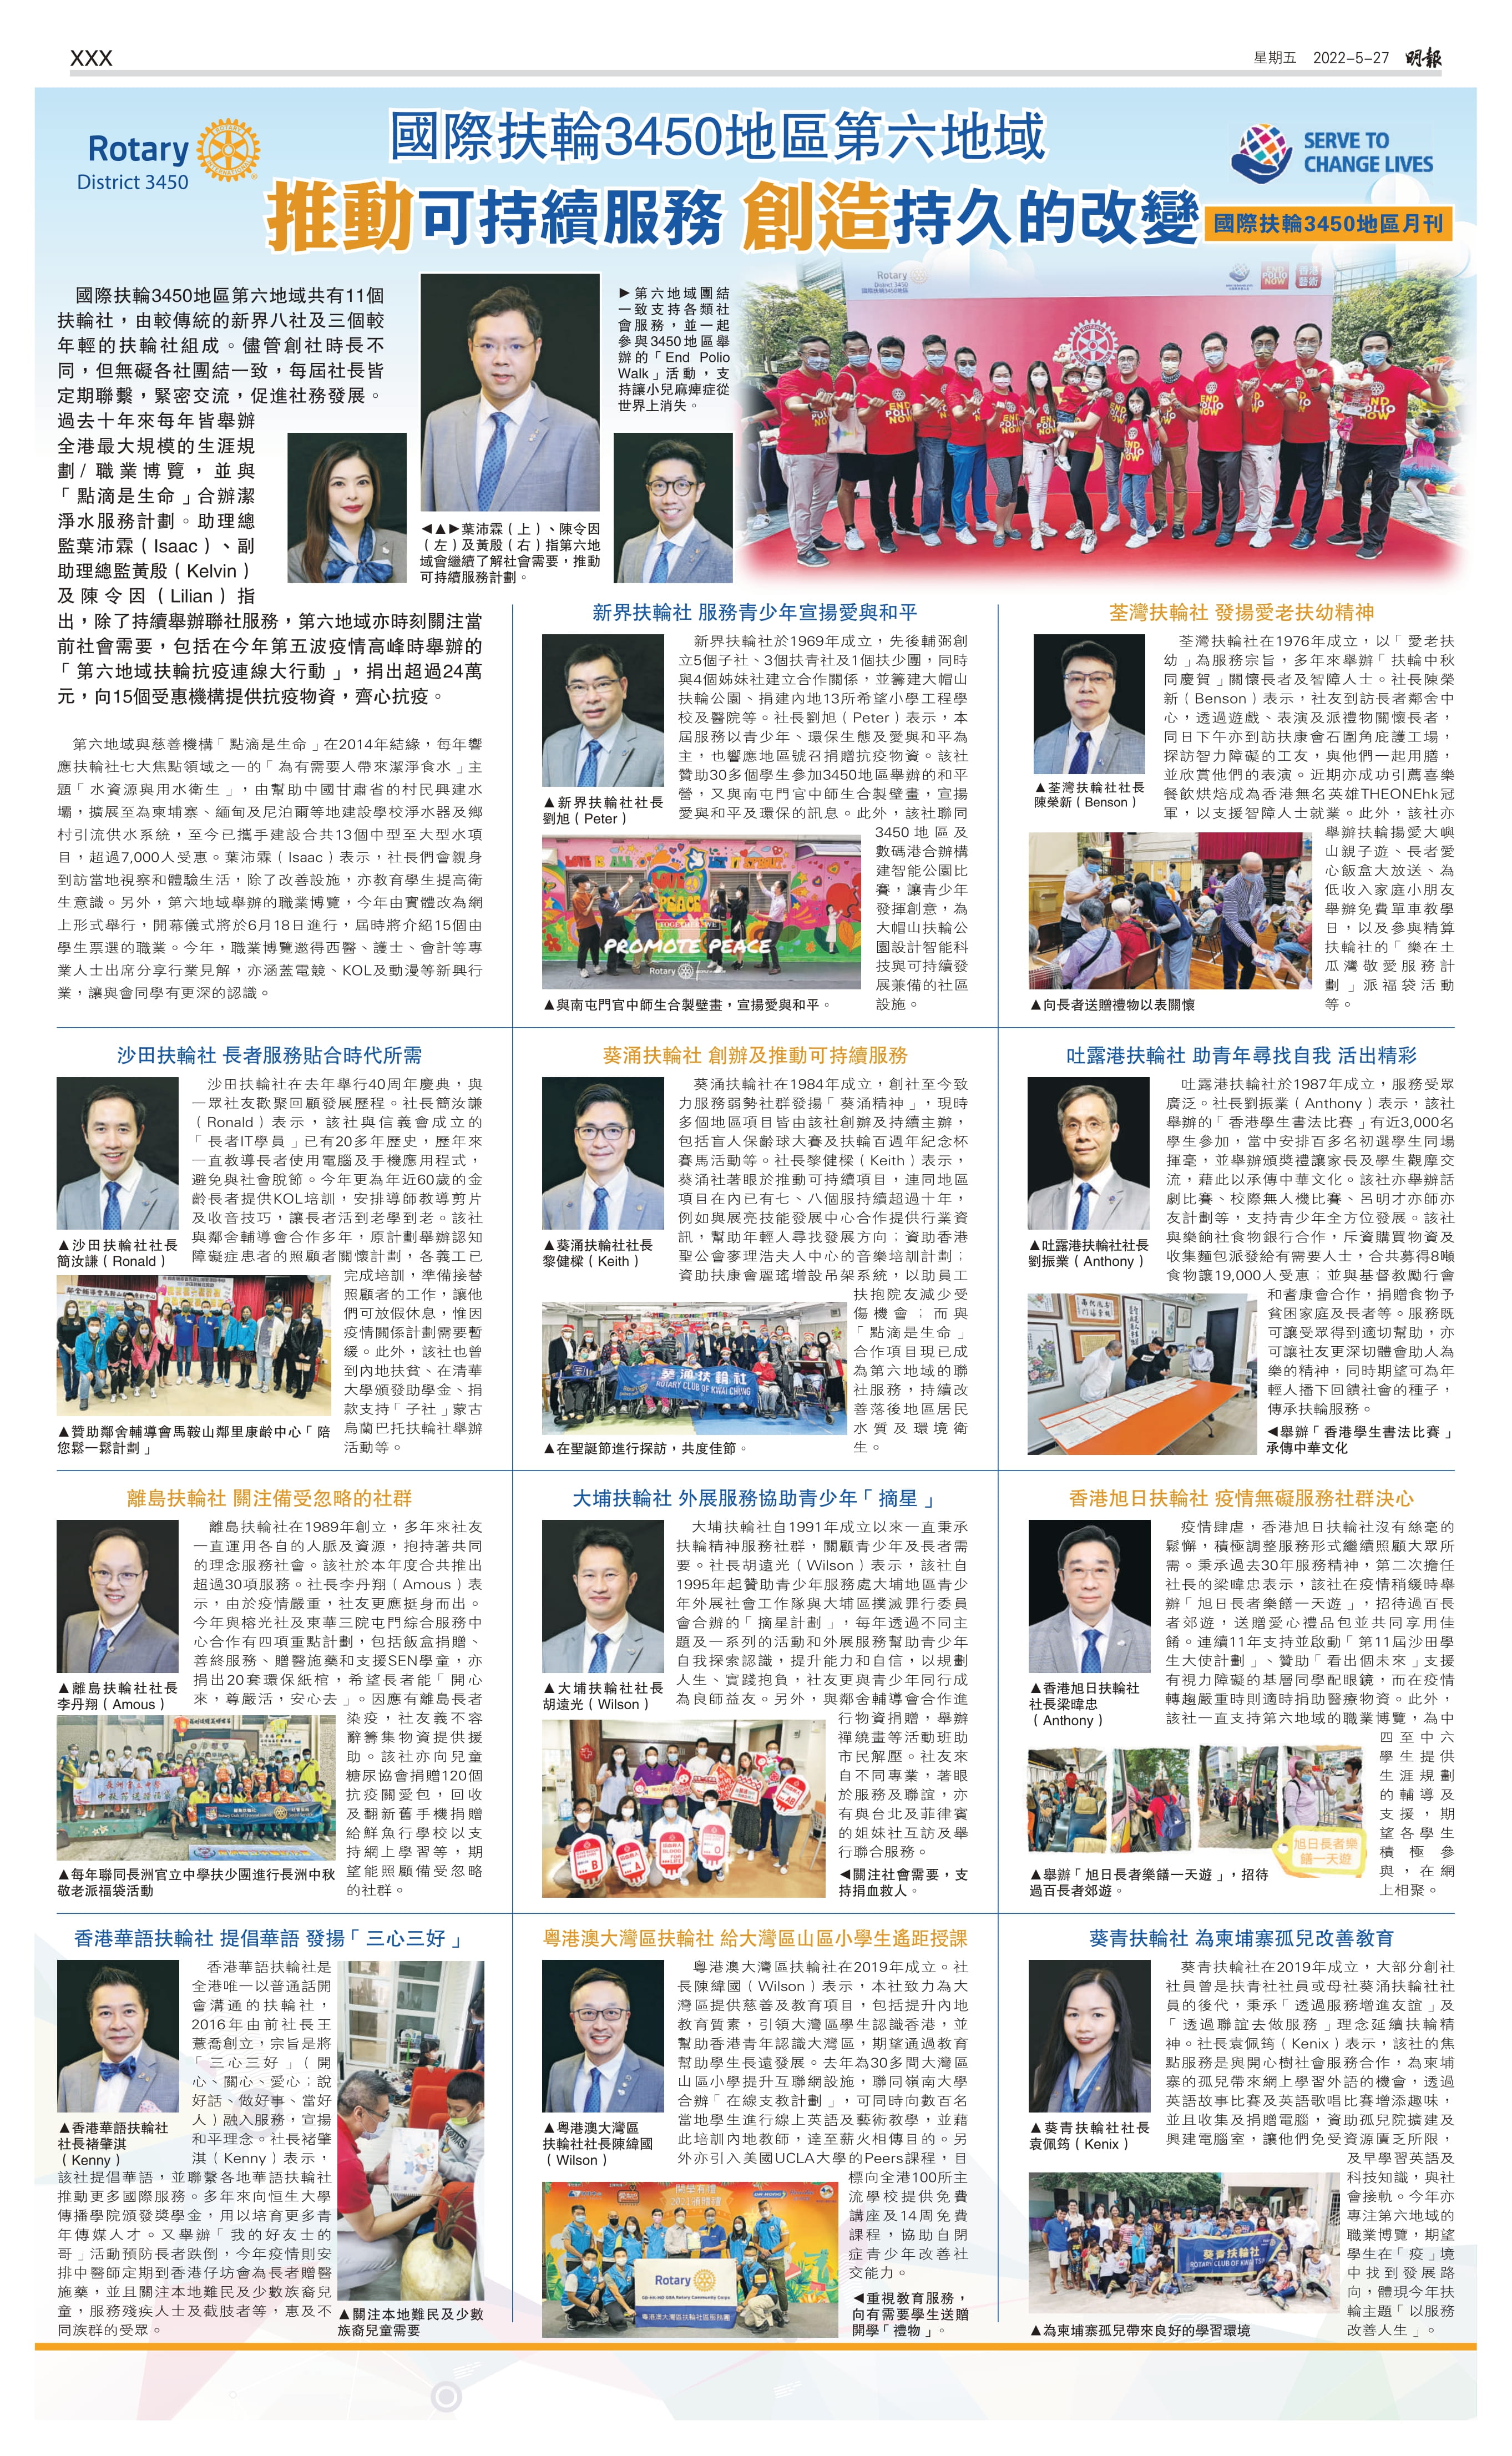 Area 6 Ming Pao interview